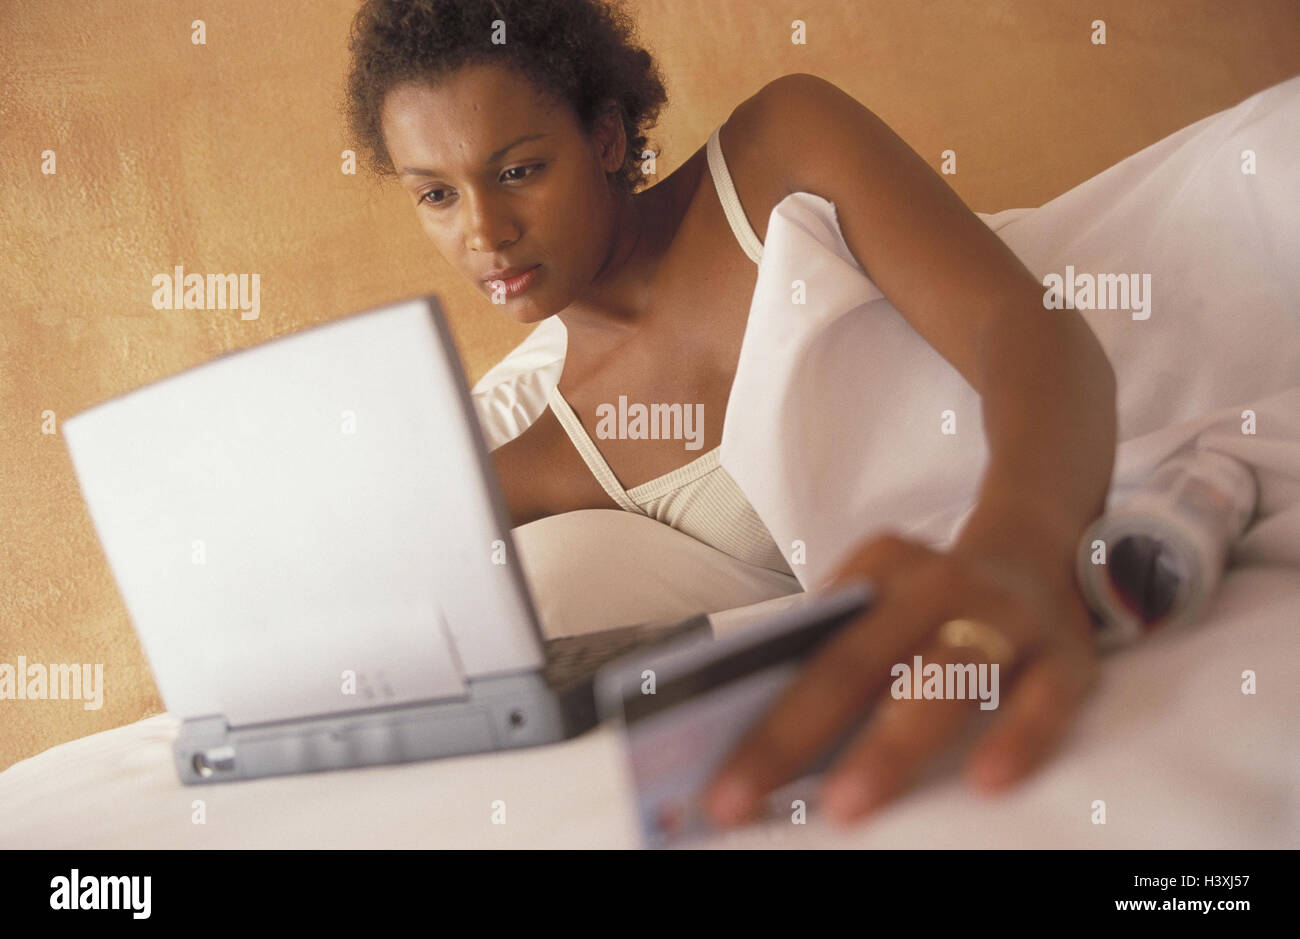 Bed, woman, magazine, laptop, credit card, Internet shopping, privately, notebook computer, computer, telecommunication, communication, Internet, teleshopping, make purchases, order, simply, comfortably, easily, pay, payment, by transfer, meanses payment, Stock Photo